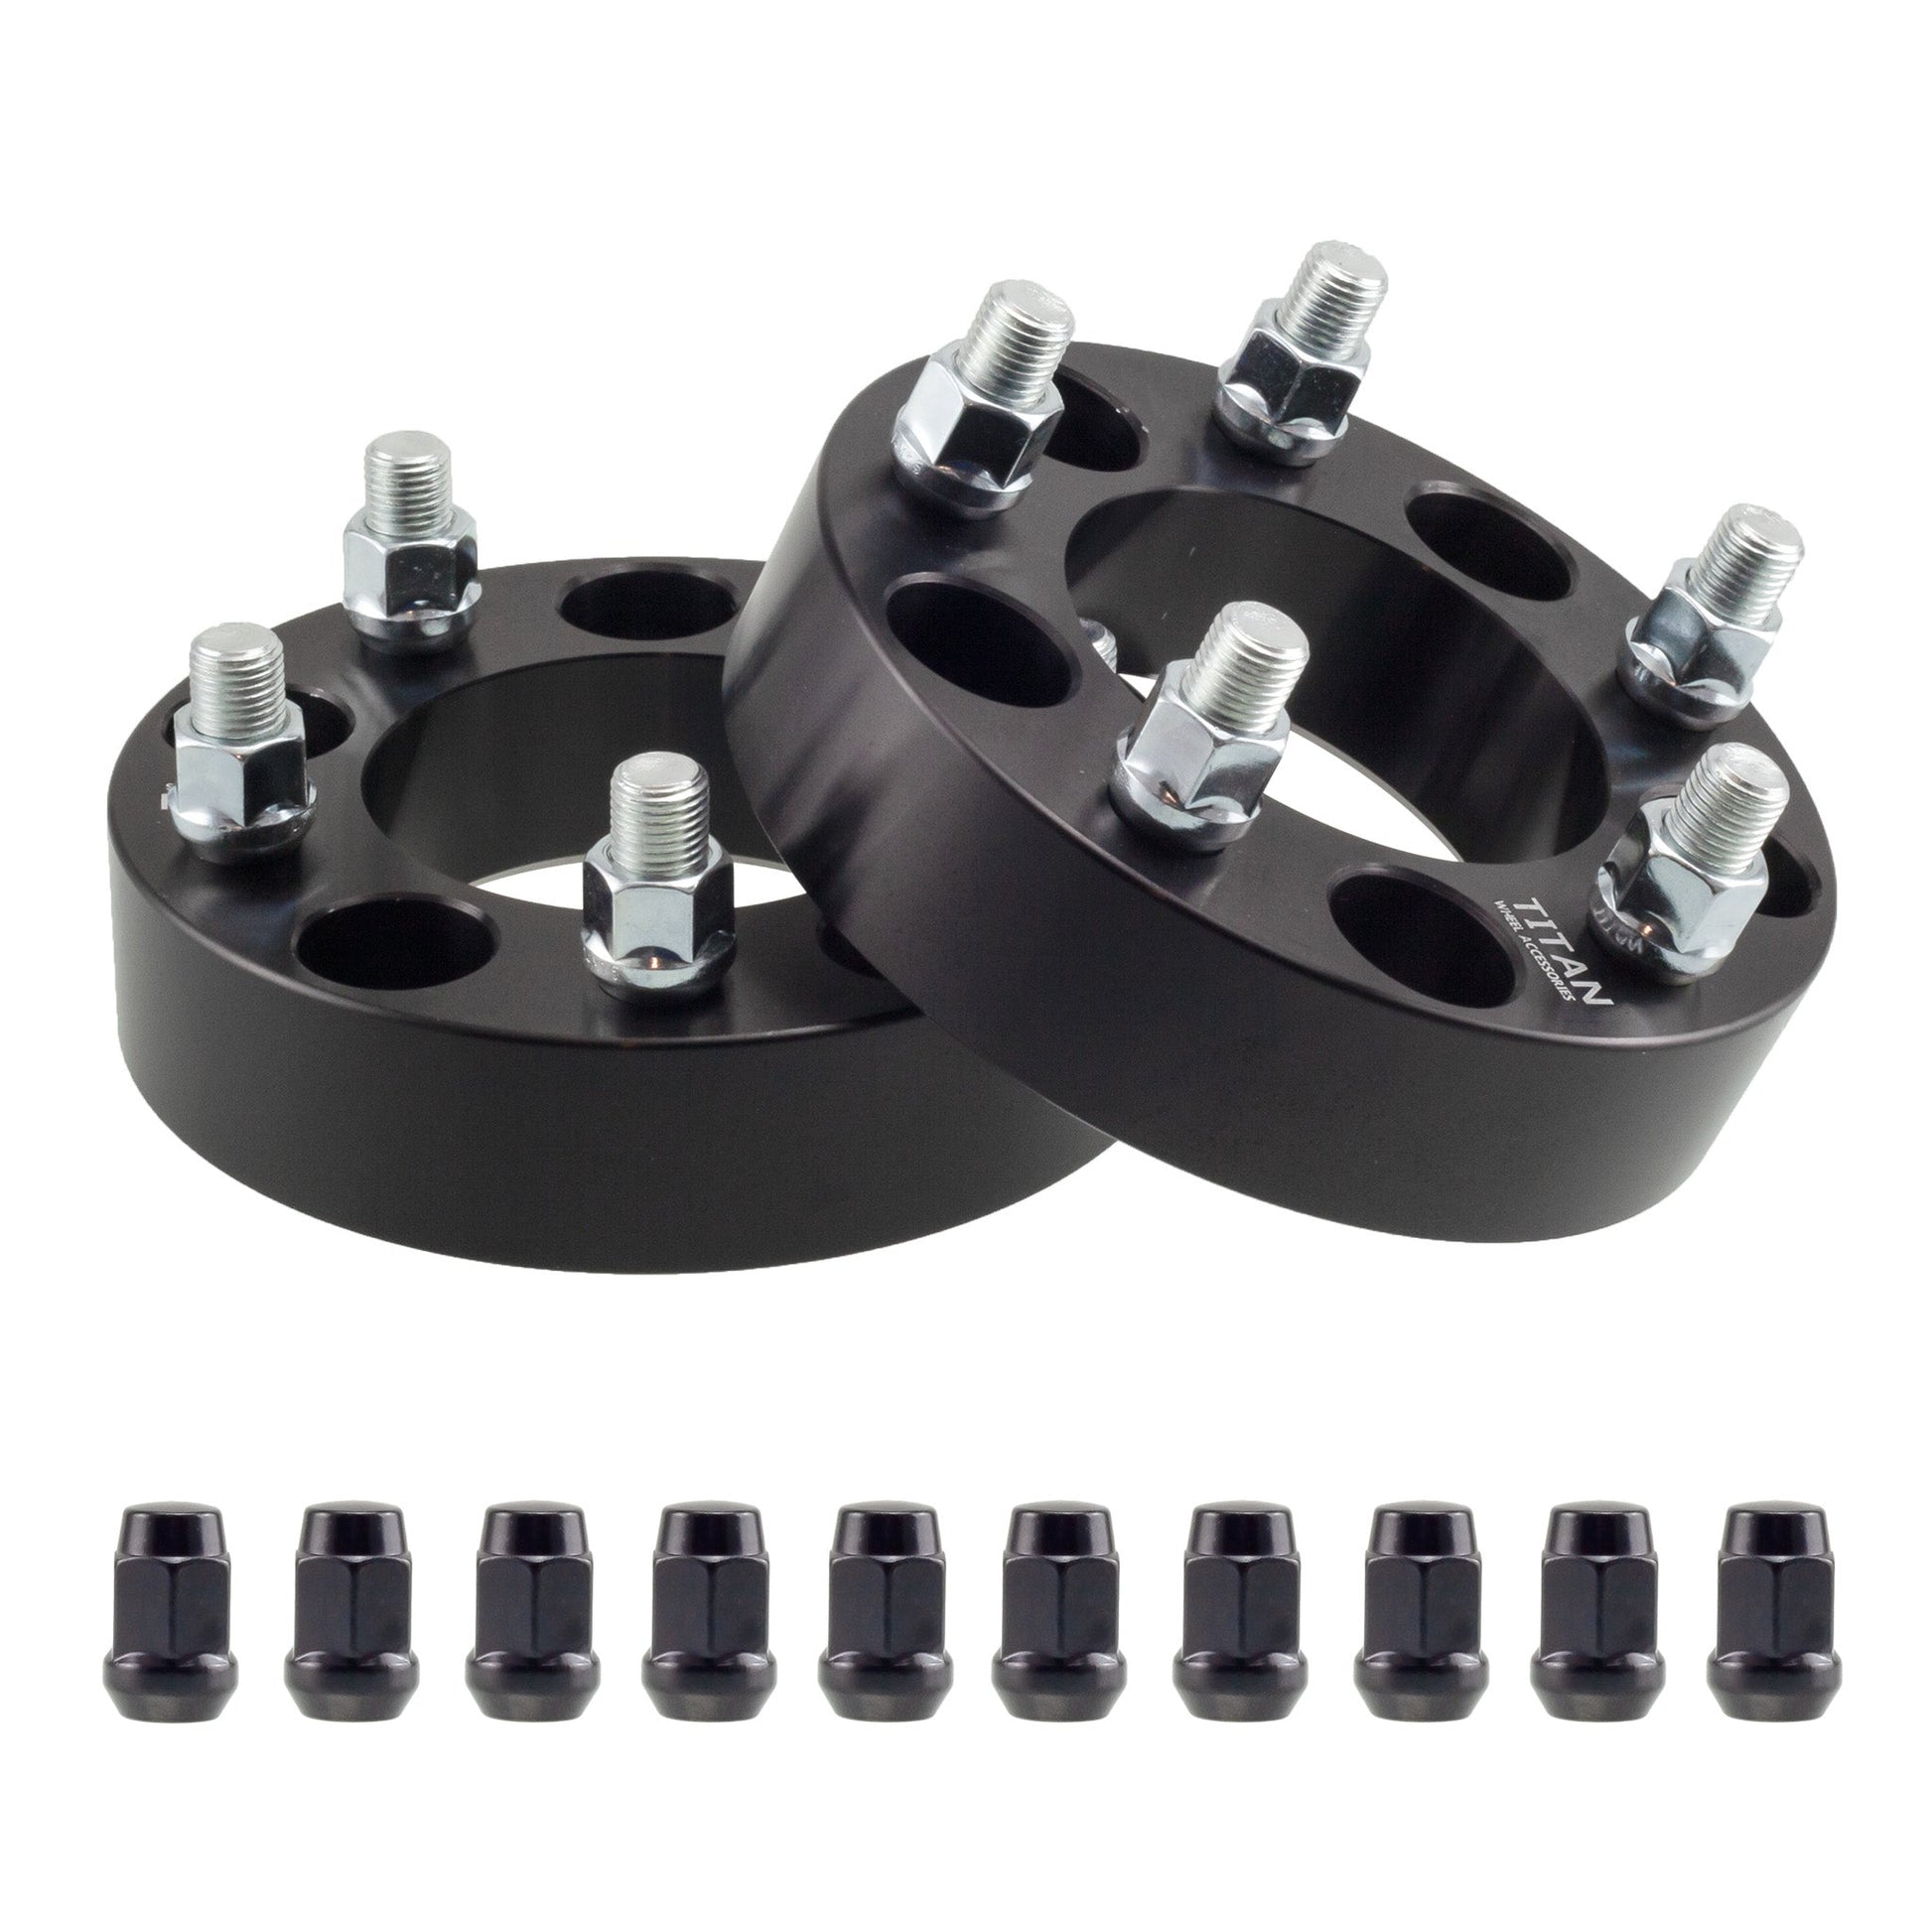 1.5" Titan Wheel Spacers for Ford Mustang Ranger Explorer | 5x4.5 | 70.5 Hubcentric | Titan Wheel Accessories